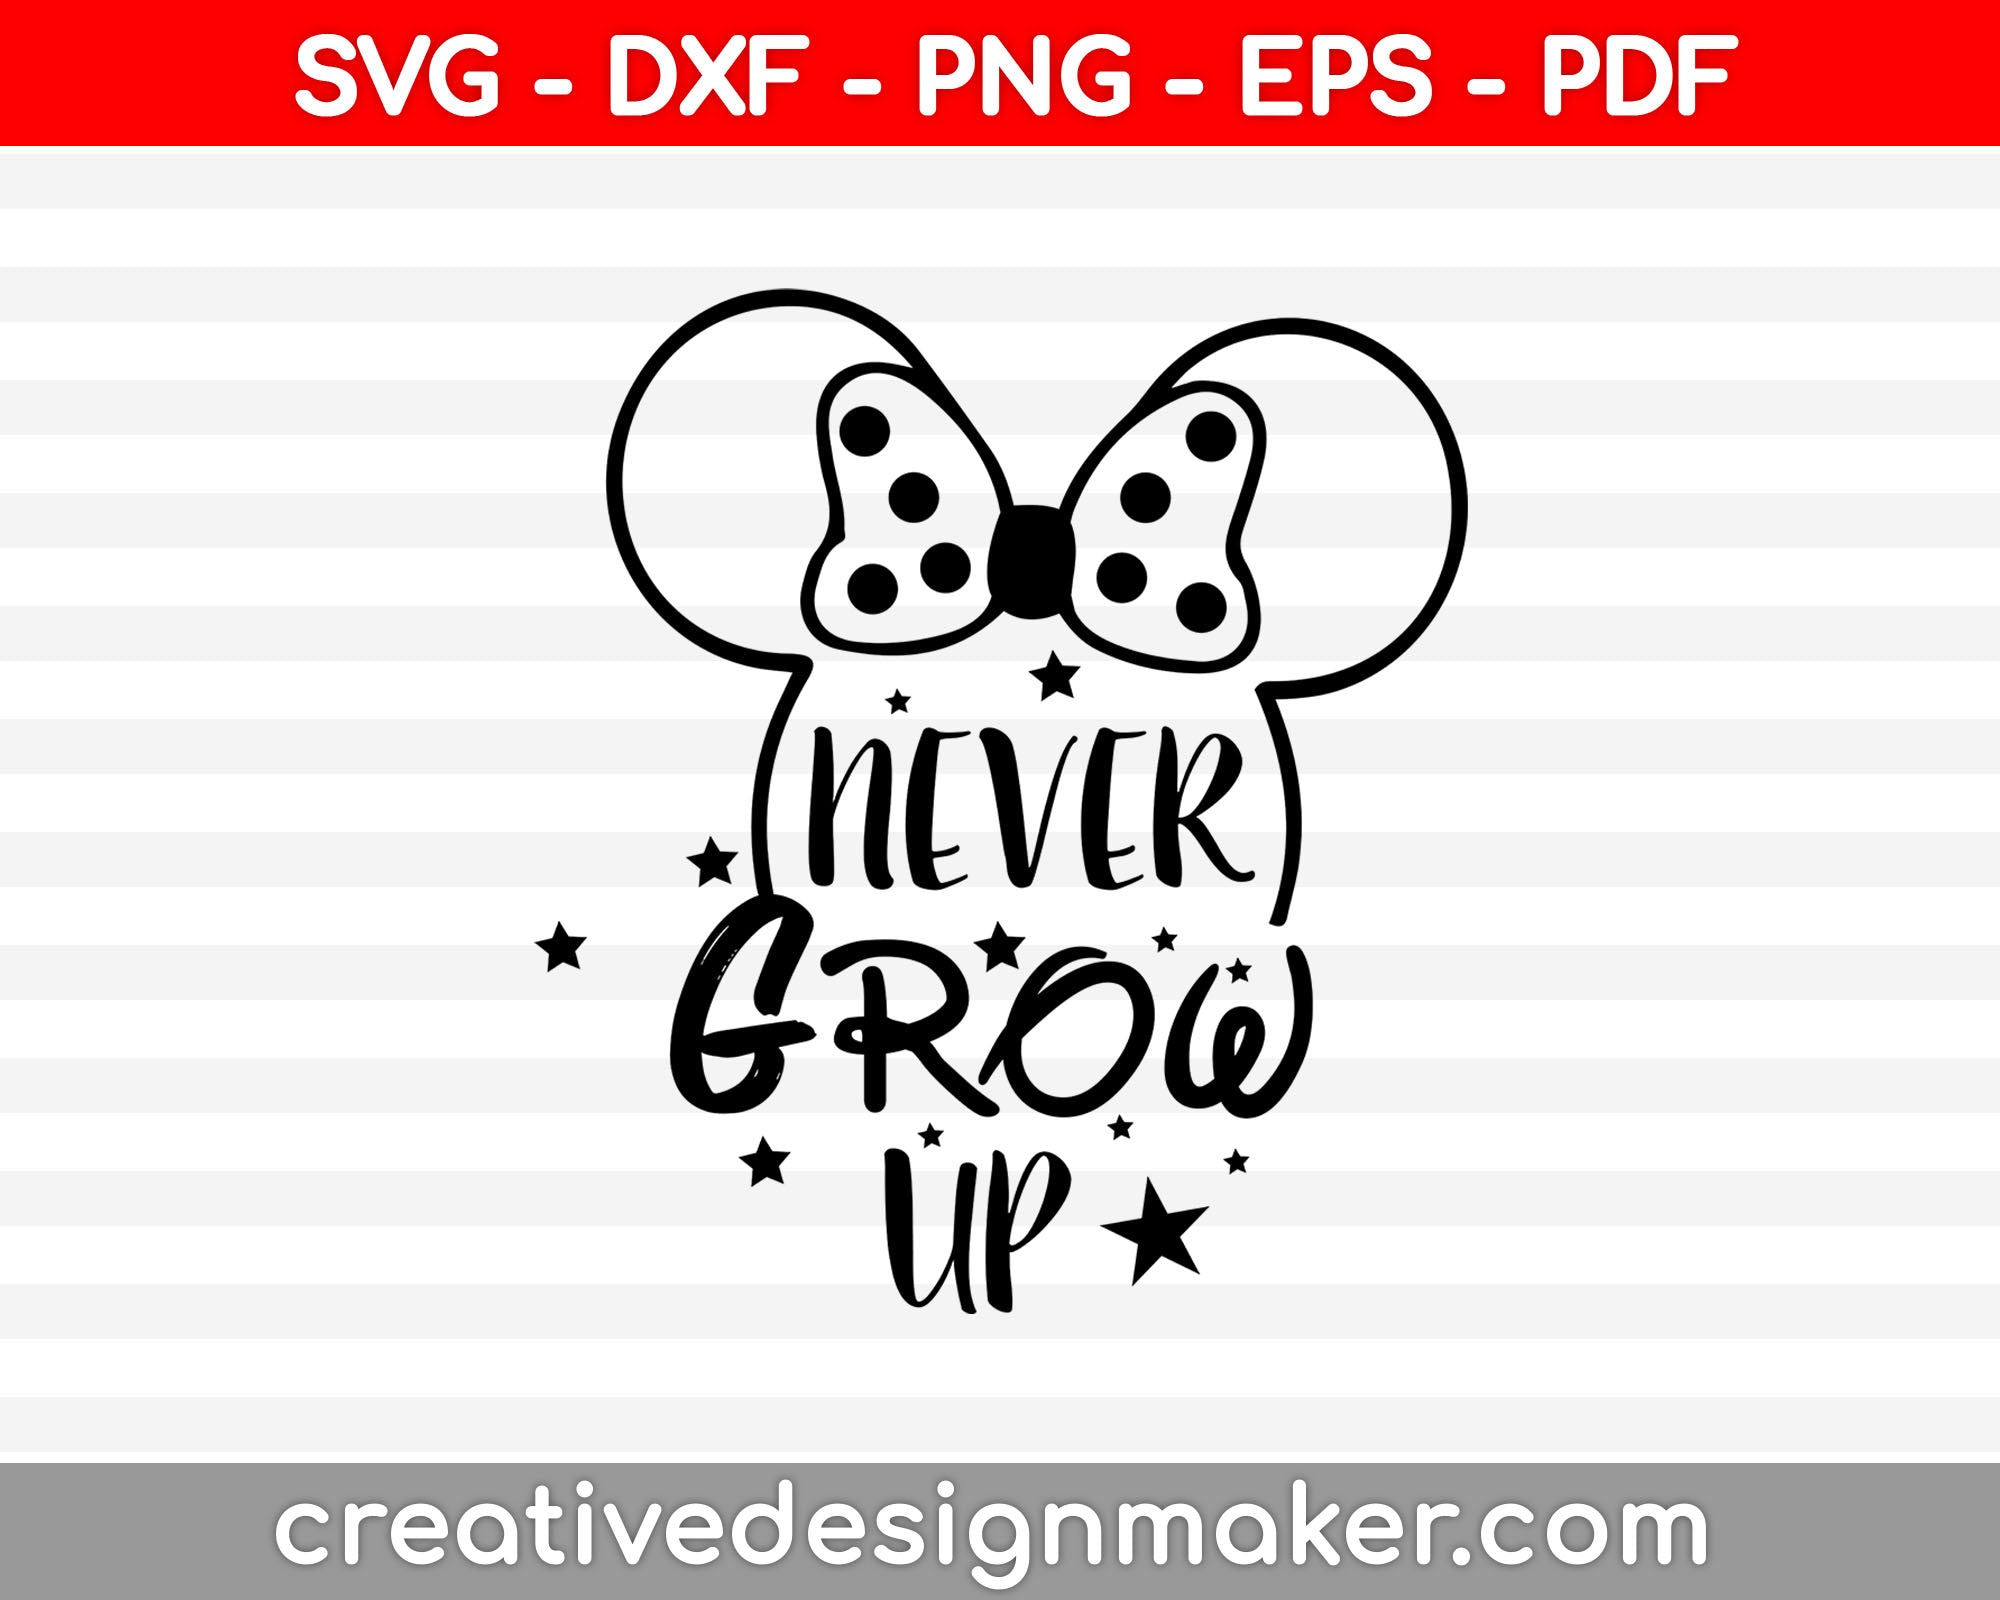 Never Grow Up svg dxf png eps pdf File For Cameo And Printable Files